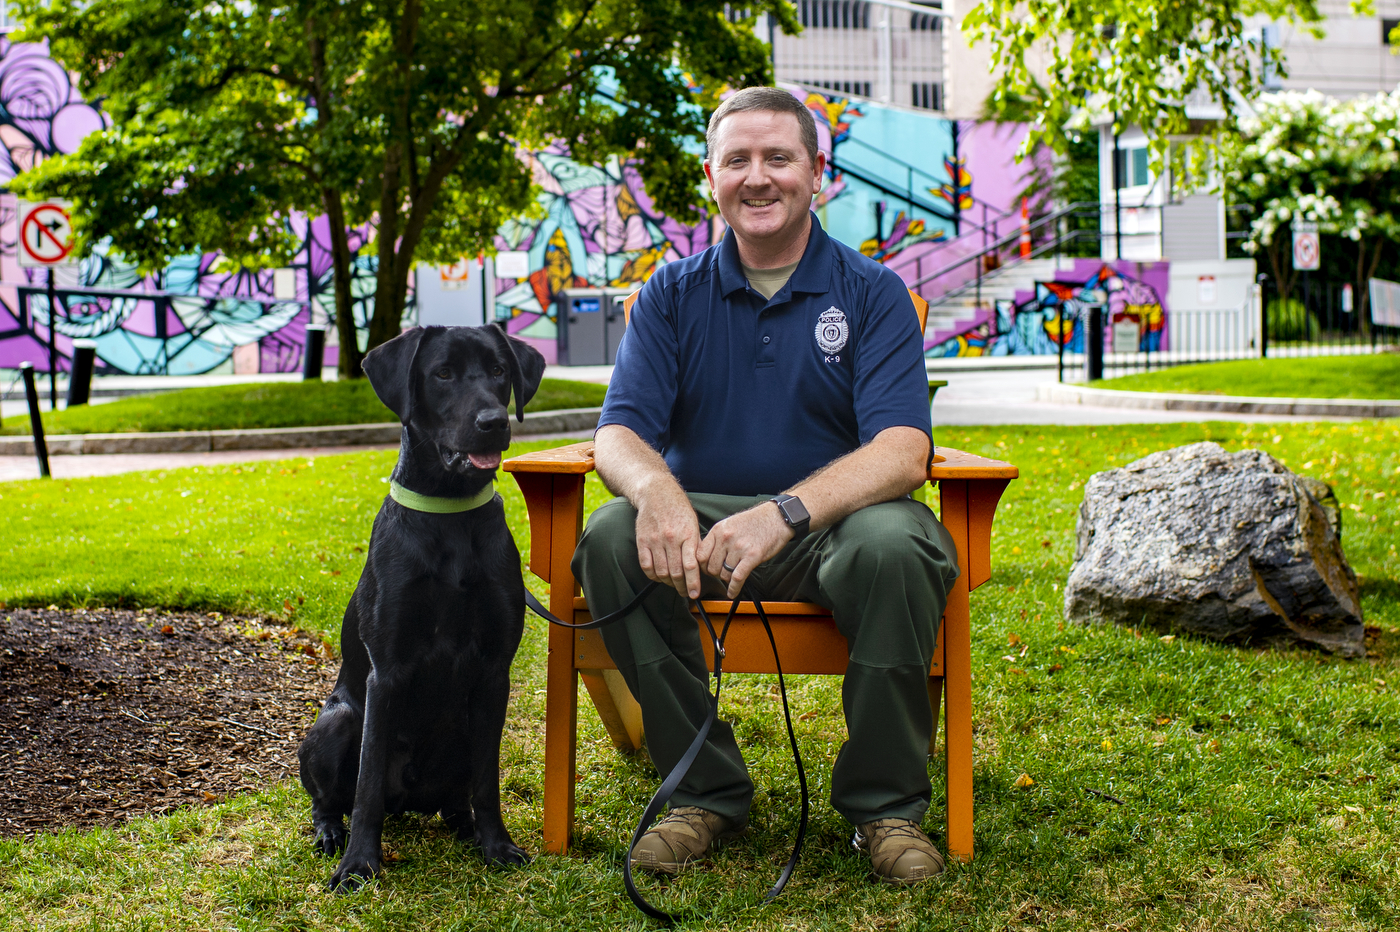 Sarge, a 1-year old black lab and the newest member of Northeastern's pack, explores the Boston campus with his handler NUPD Officer Sgt. Joe Corbett.